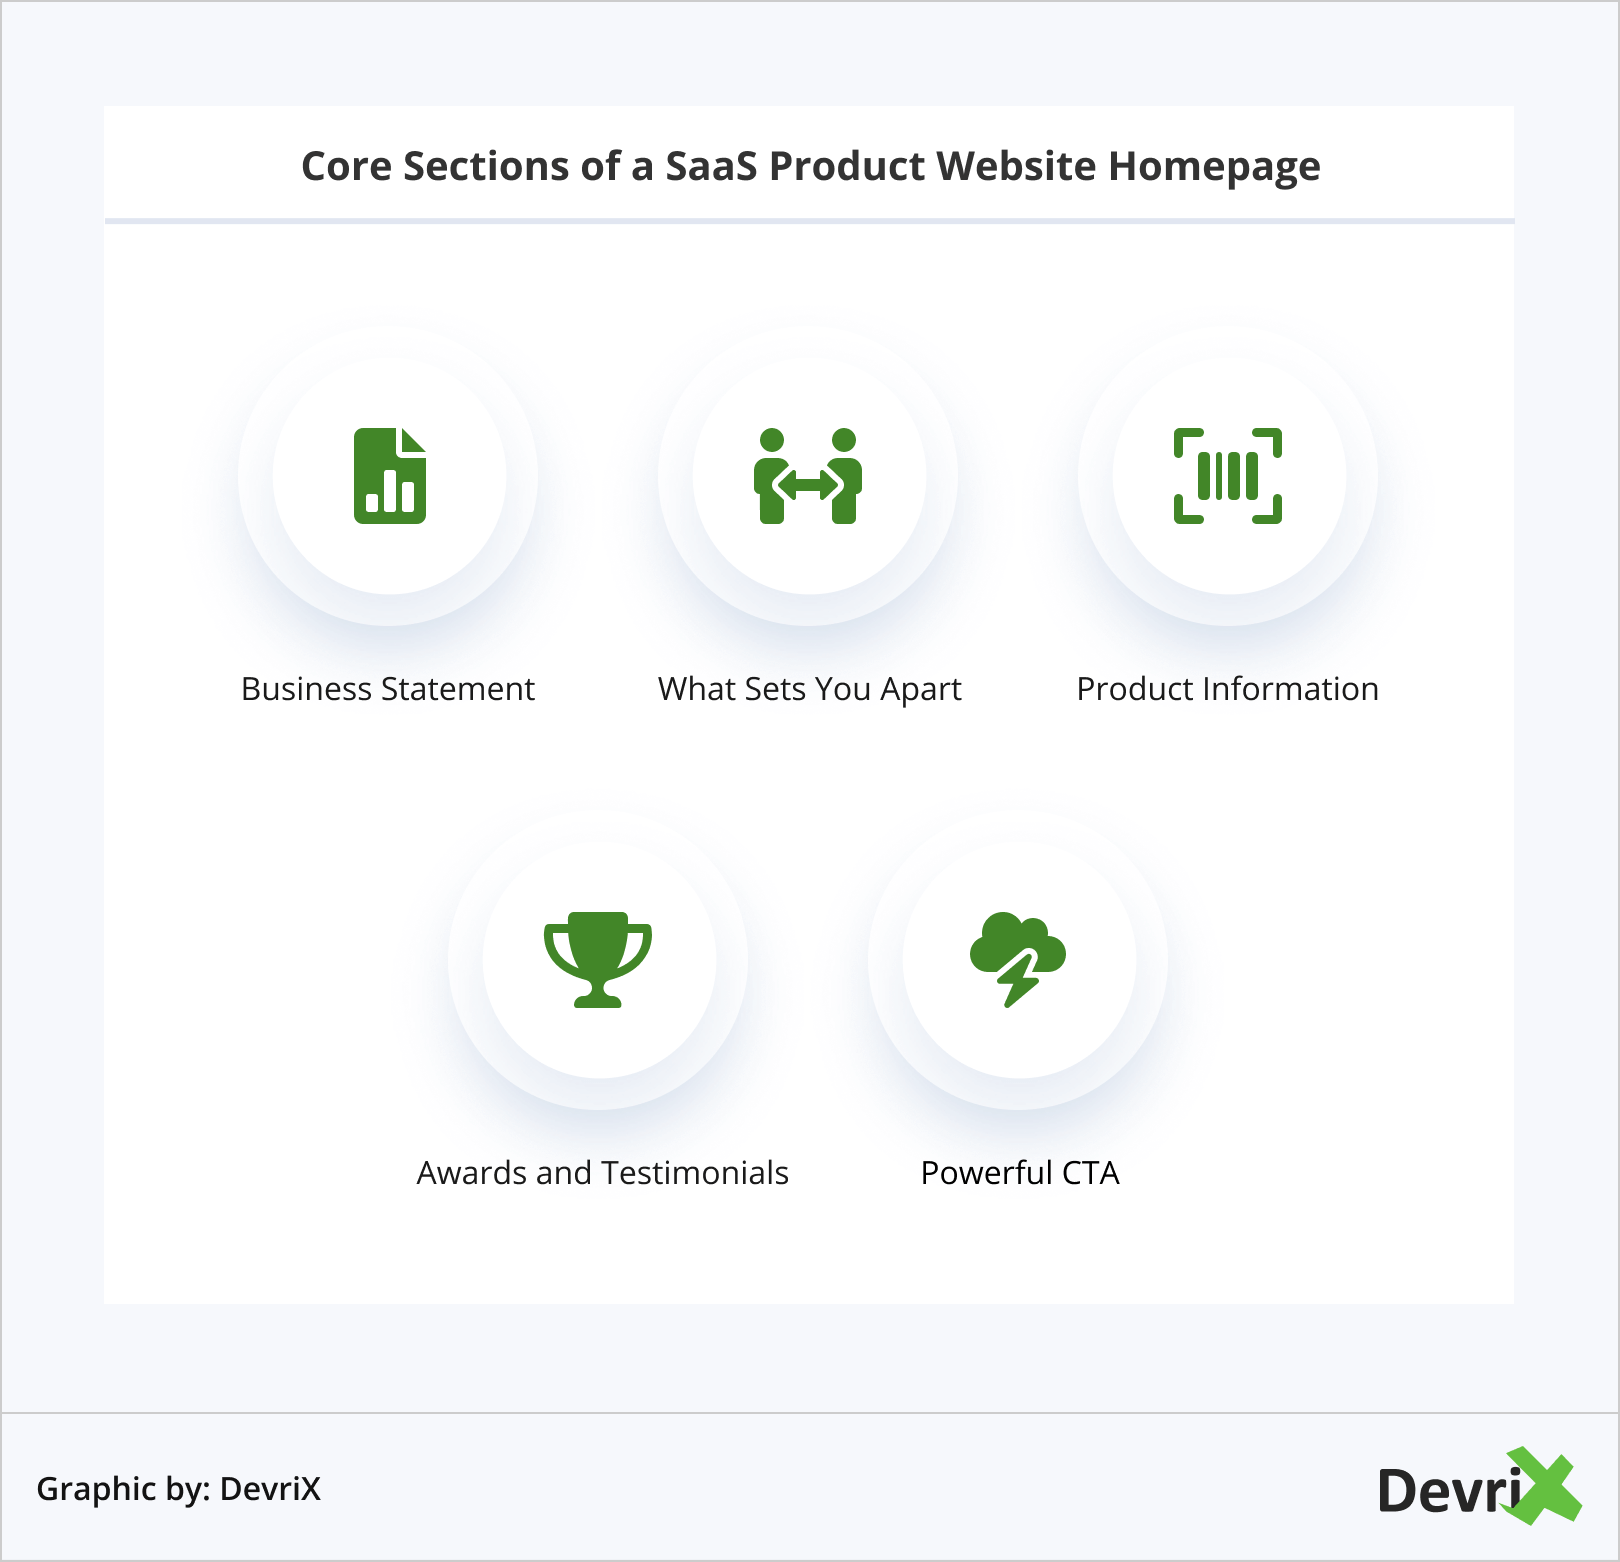 Core Sections of SaaS Product Website Homepage